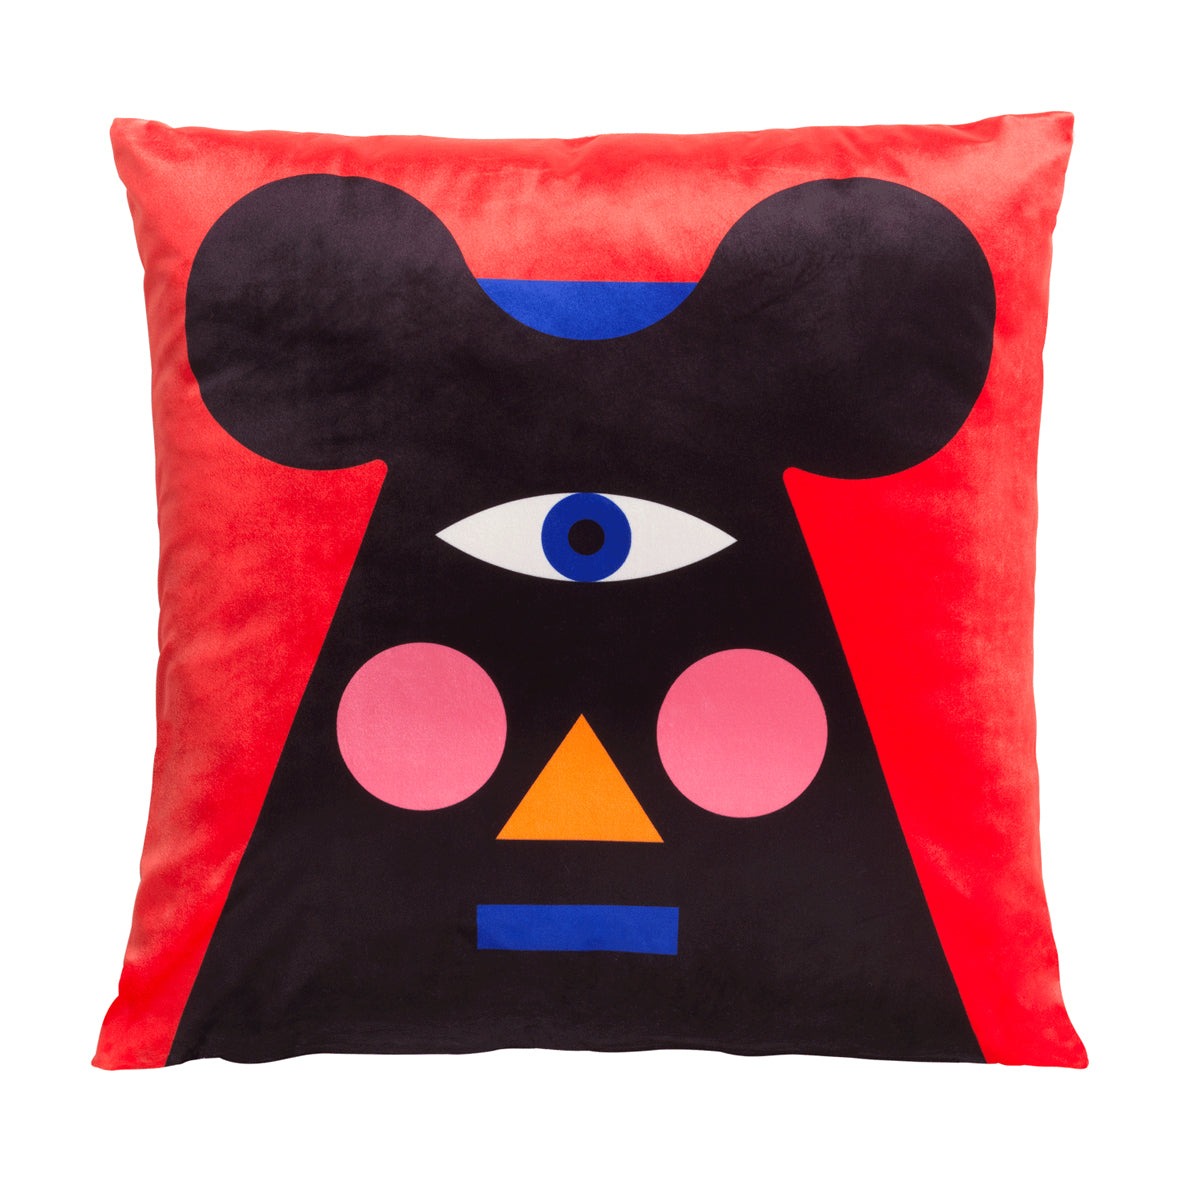 Oggian Mr Mouse Cushion Cover by Marco Oggian - Qeeboo